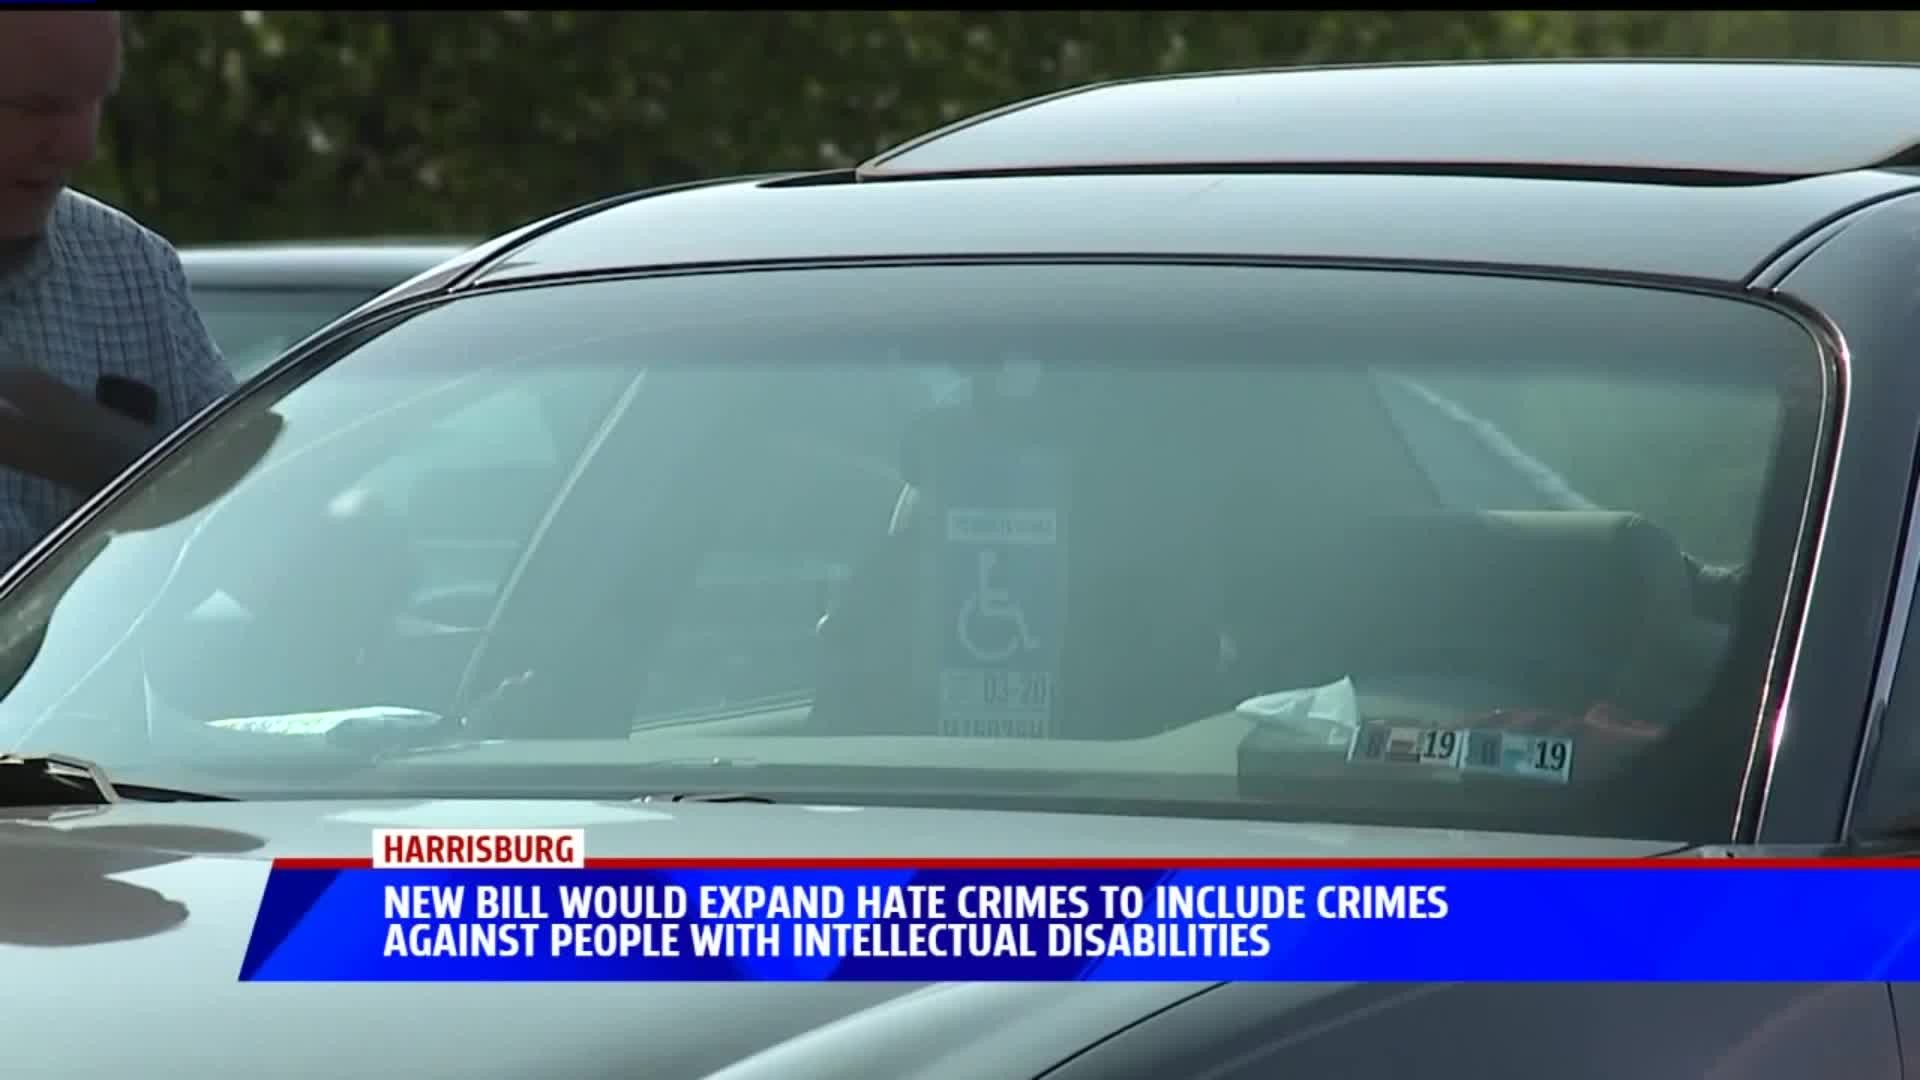 Bill would expand hate crimes to include crimes against people with intellectual disabilities